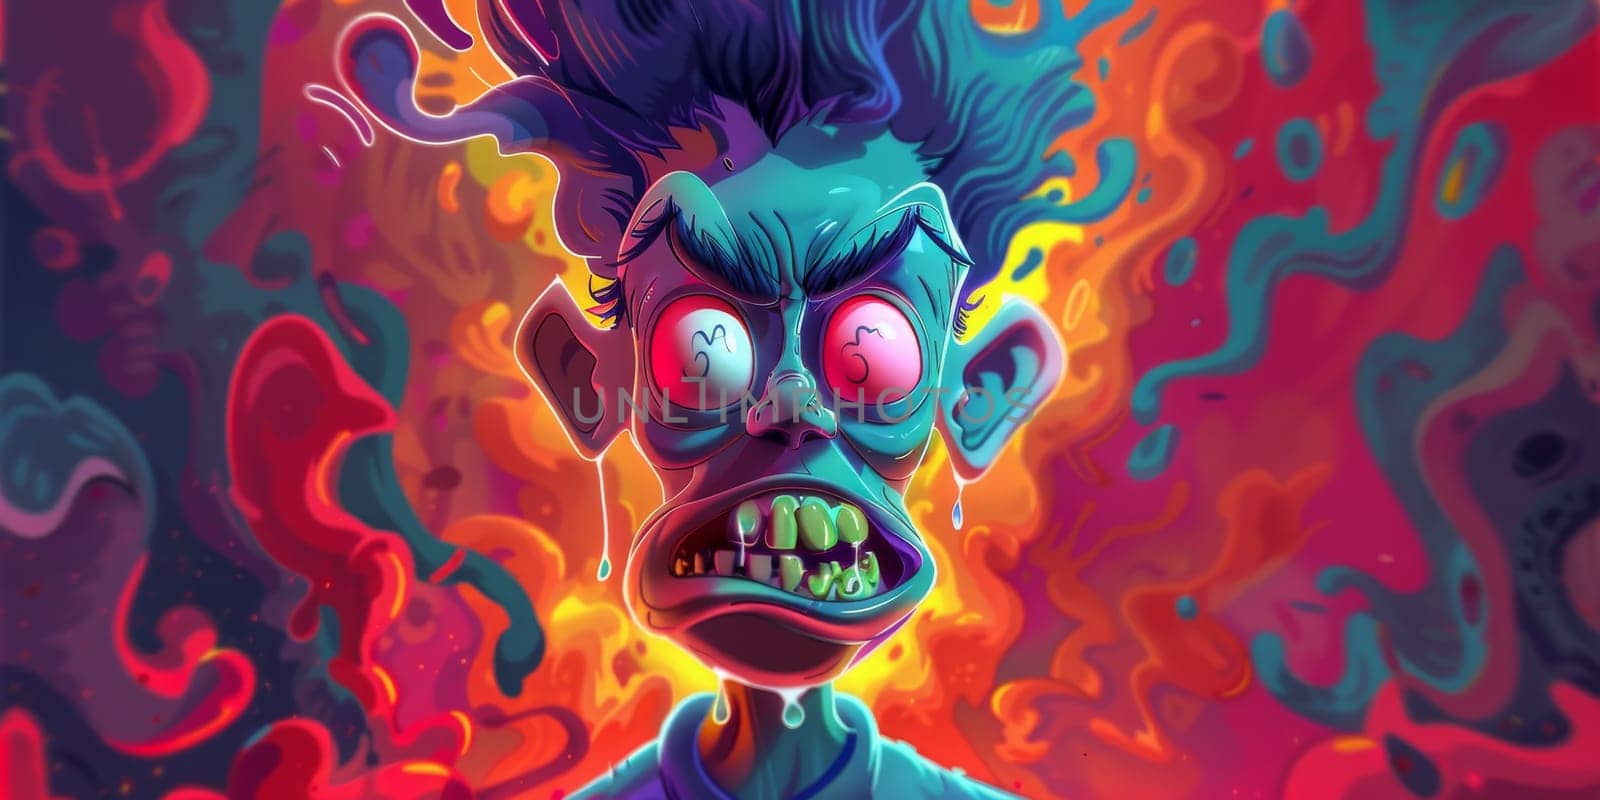 A painting depicting an angry aggressive man with a vibrant blue hair and piercing red eyes by Kadula